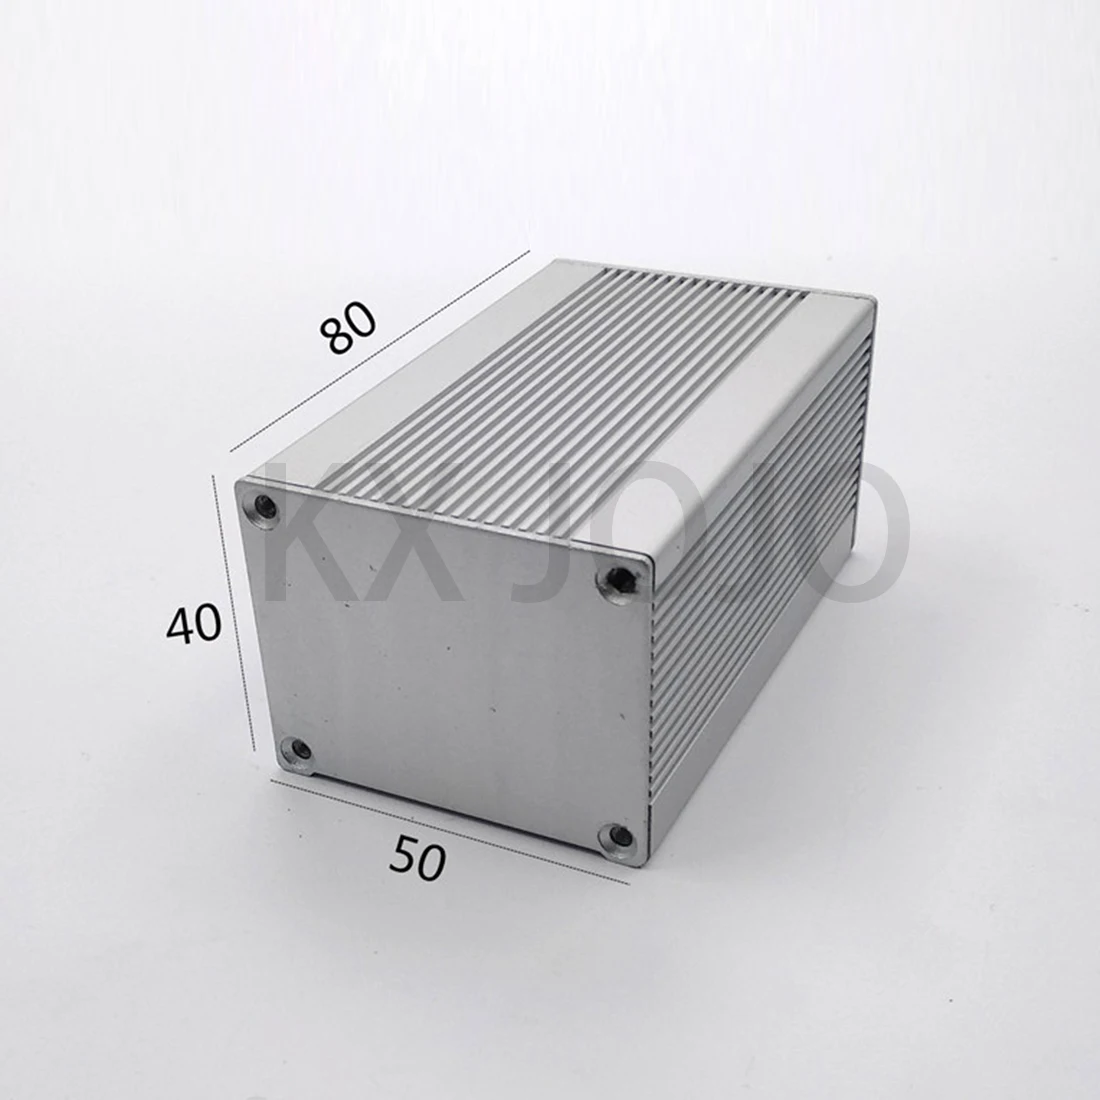 

Aluminum Enclosure 50*40*80mm Silver Waterproof Box with Ears Split Type Case Electronic Box DIY Power Housing Instrument